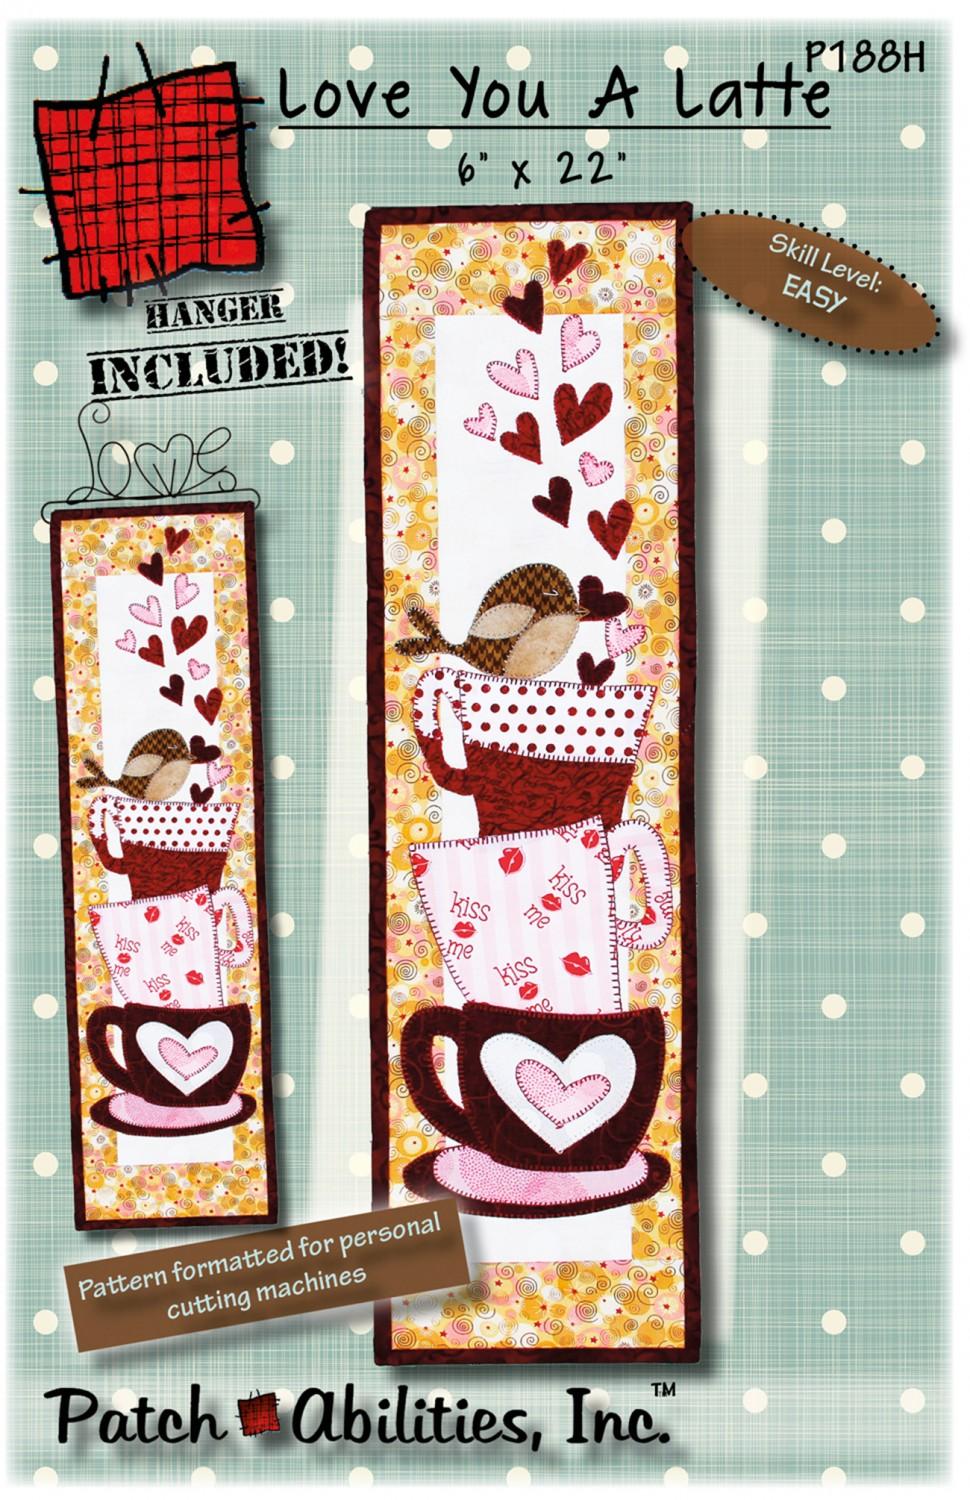 Love You a Latte Wall Hanging with Hanger